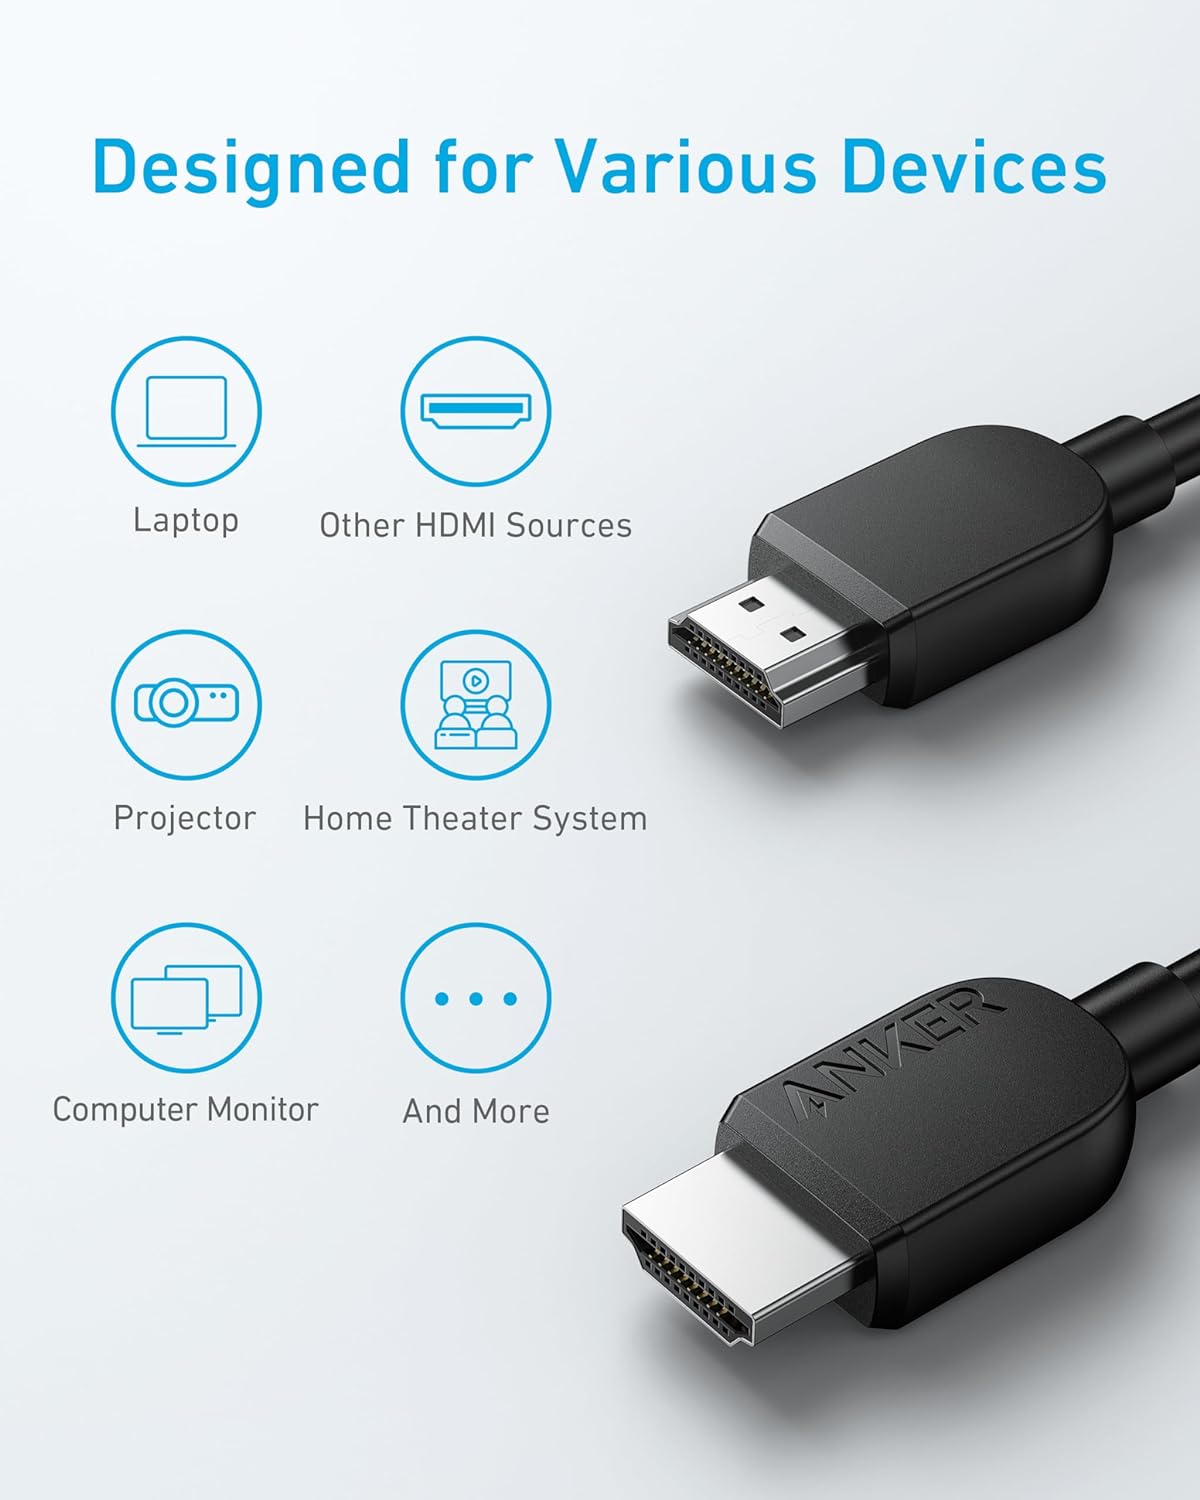 Anker HDMI to HDMI Cable / 6ft 8K - Black